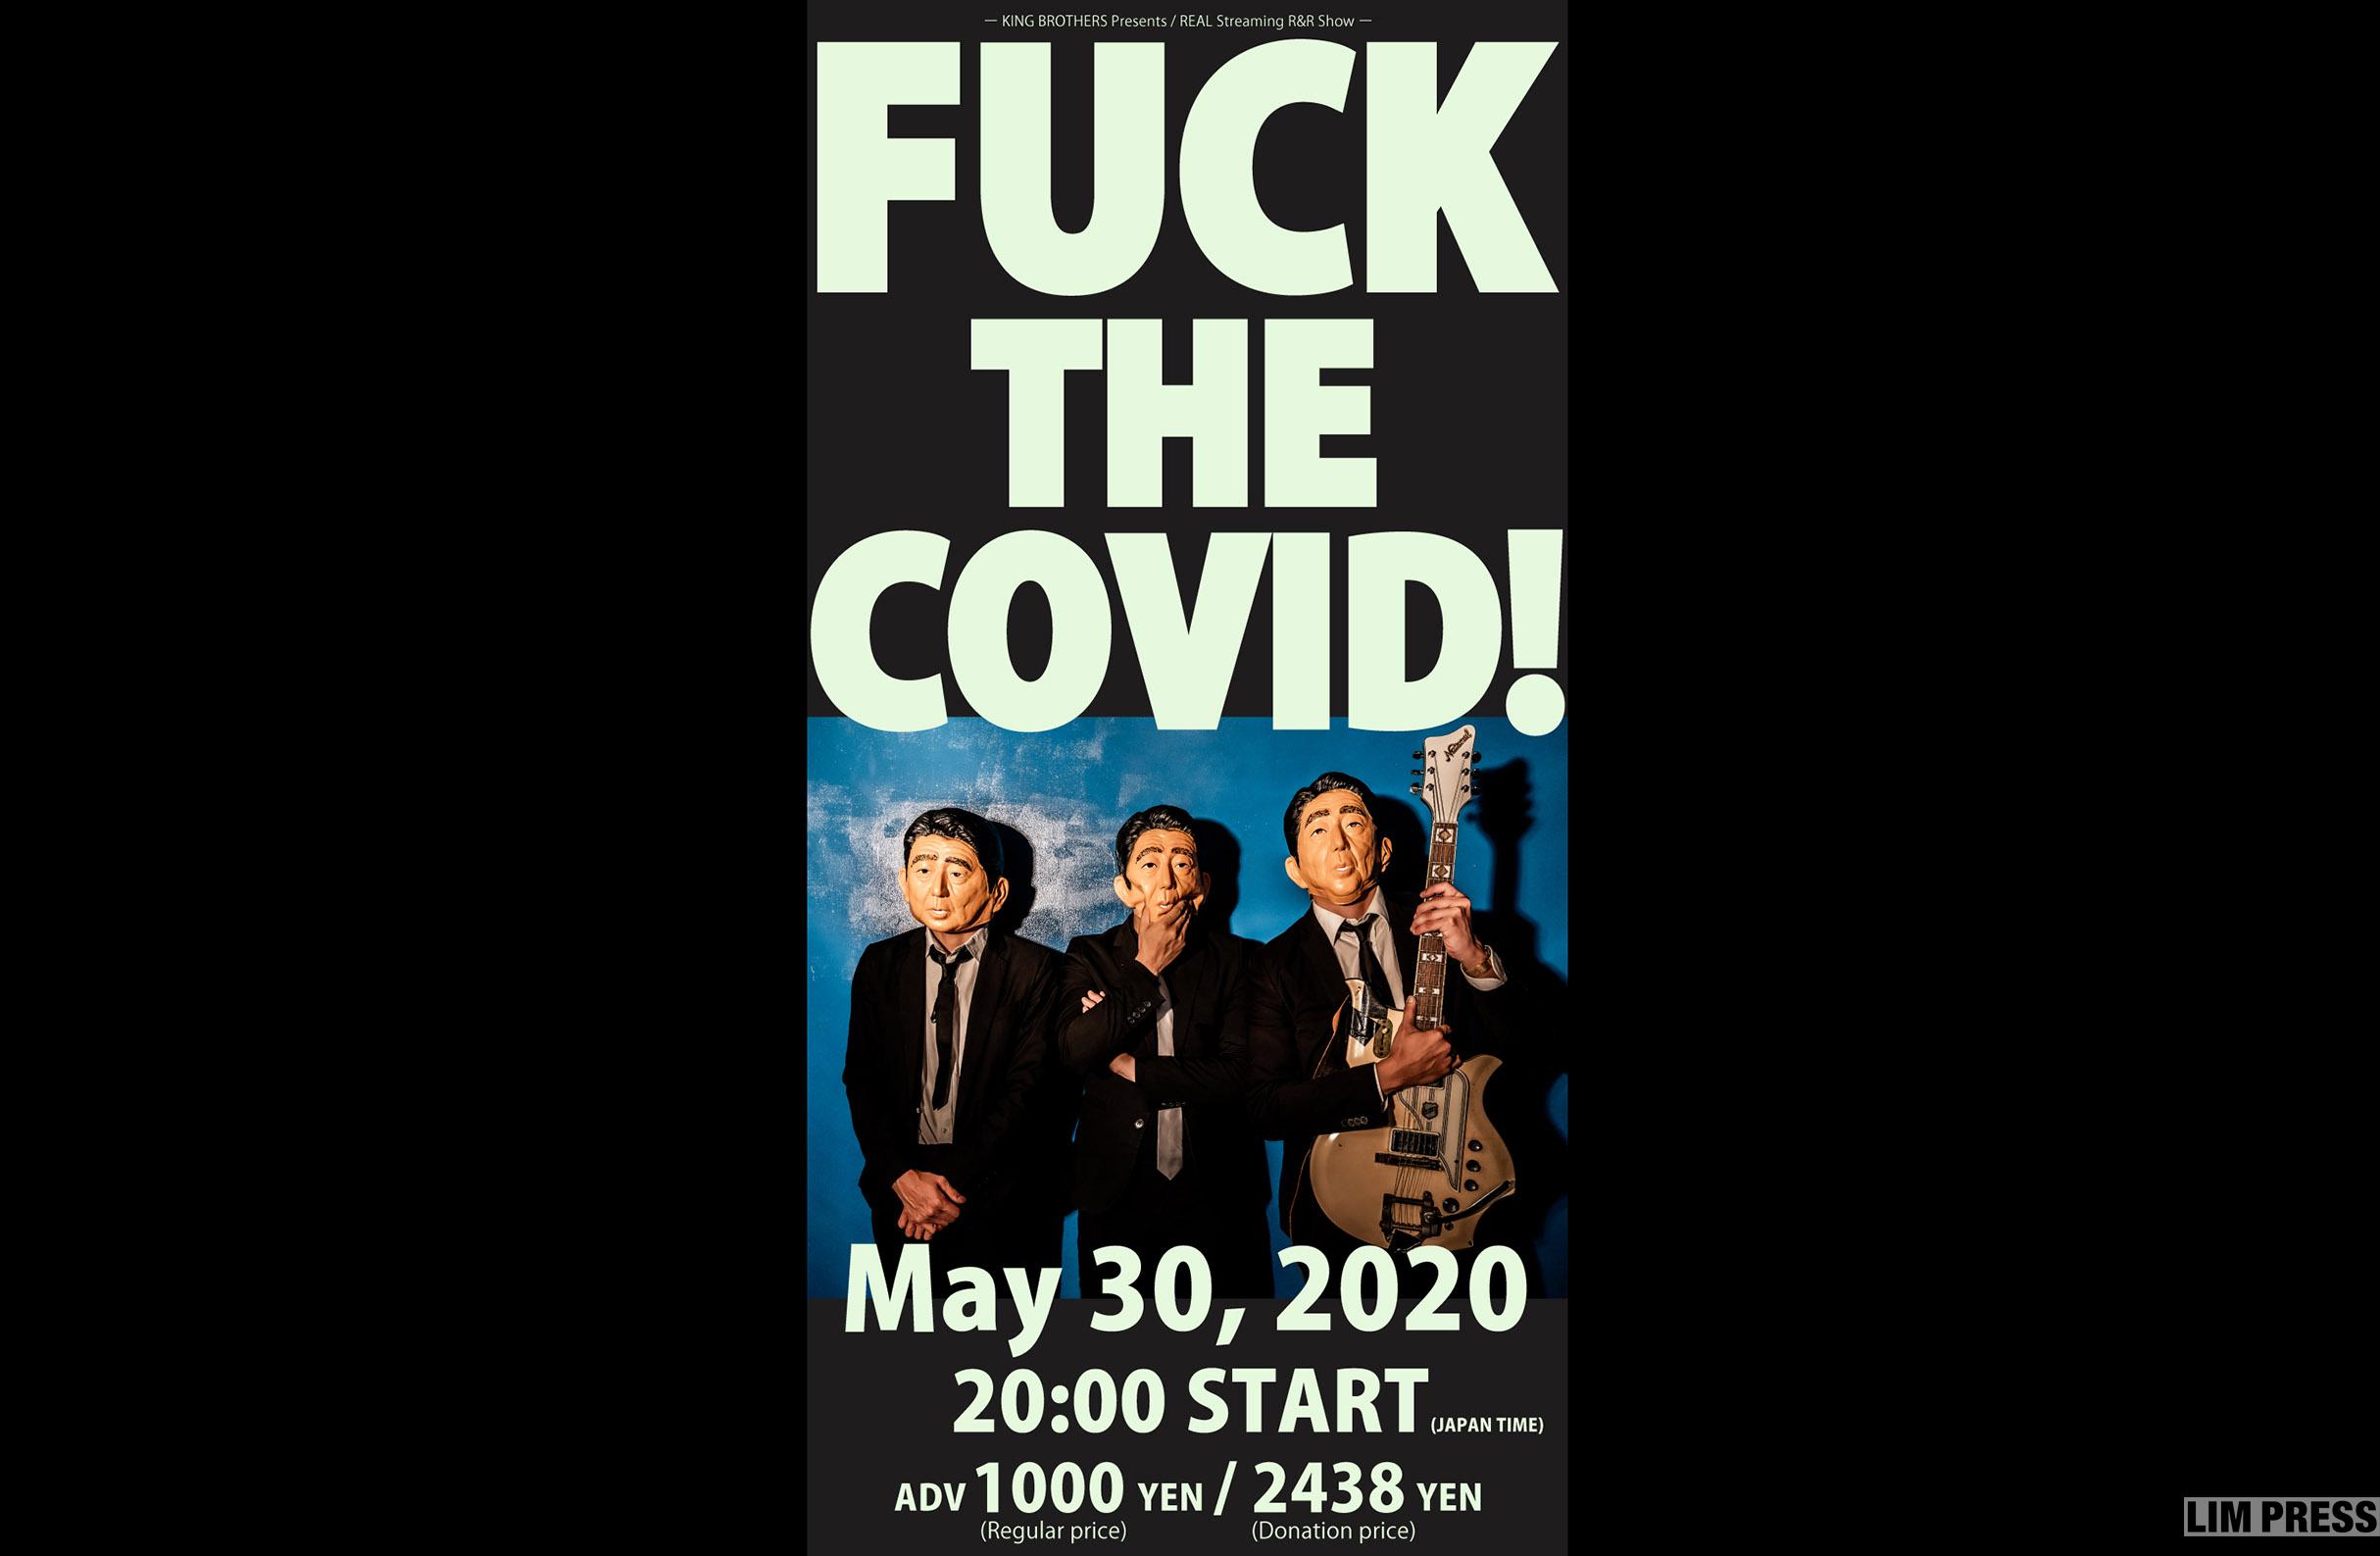 KING BROTHERSがストリーミング生ライブ『FUCK THE COVID!』をStreaming+にて配信決定！